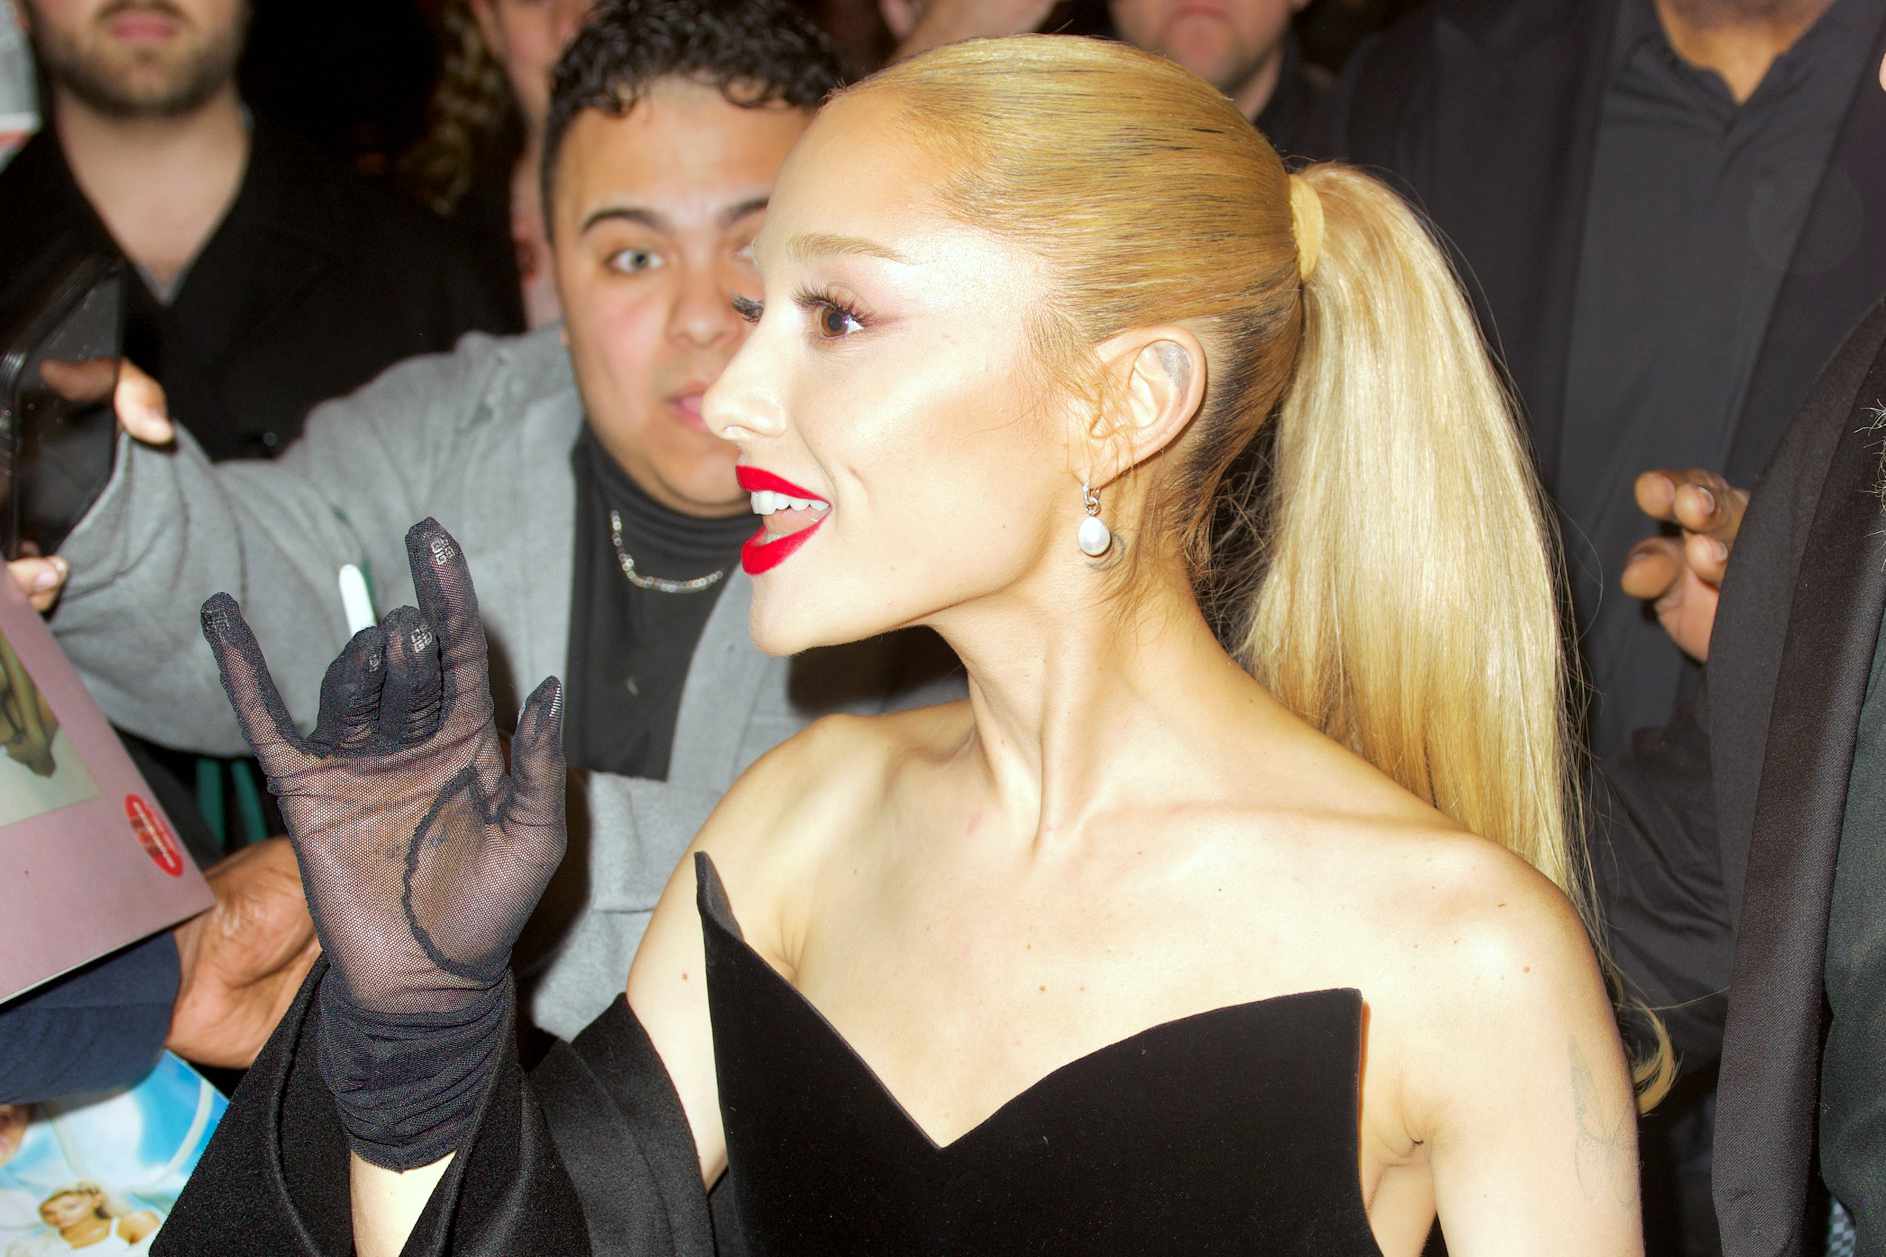 Ariana Grande wearing a black dress with matching gloves & red lipstick